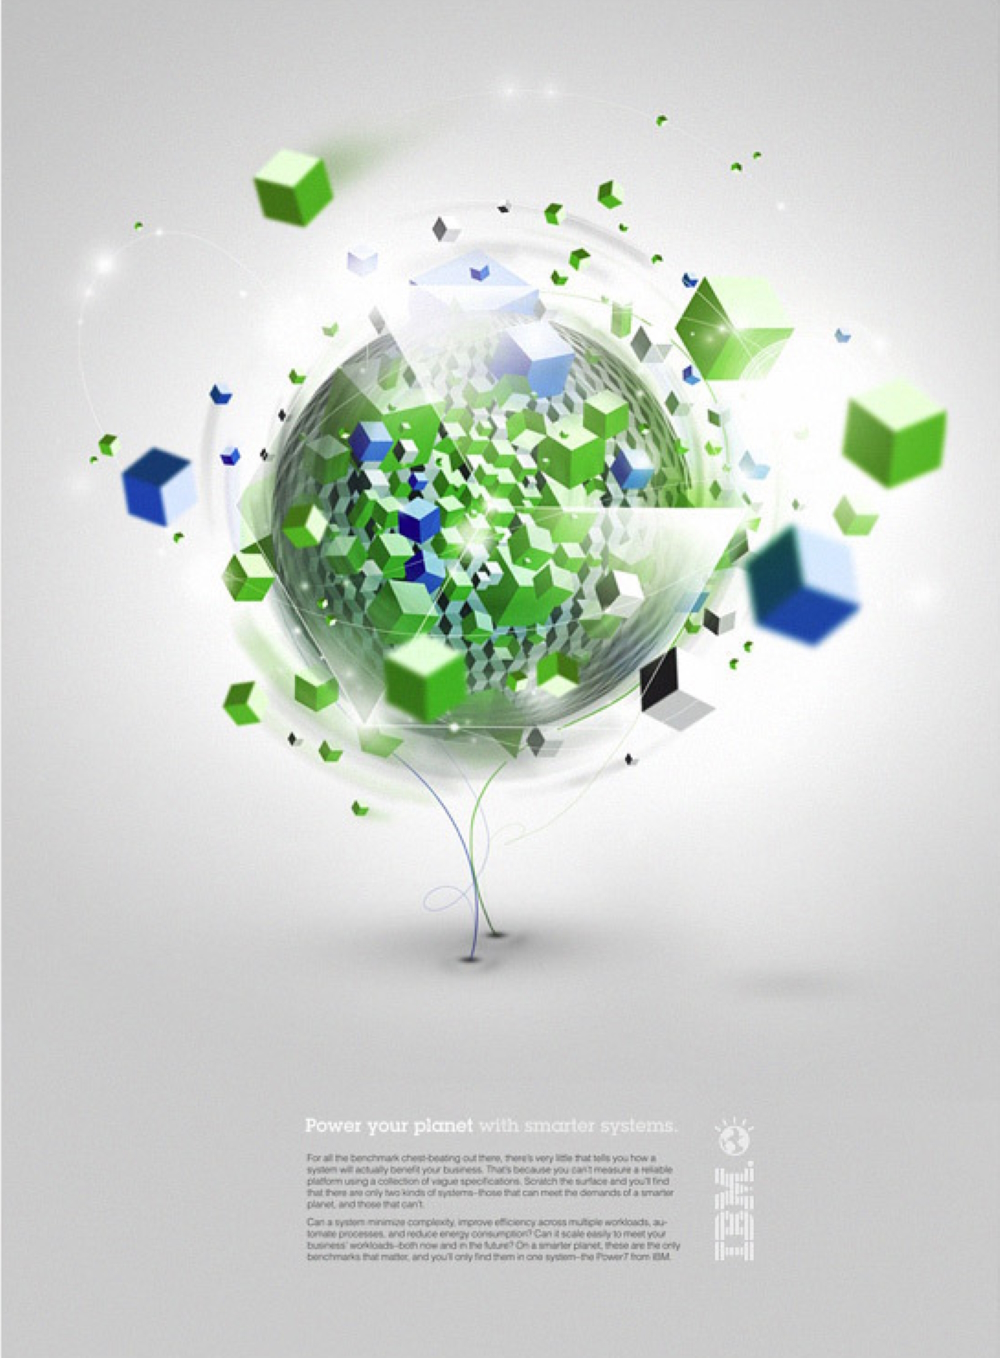 David Mascha's work for IBM’s ‚Power Your Planet/System X‘ campaign (here The Wall Steet ad) started it all for him in 2010.